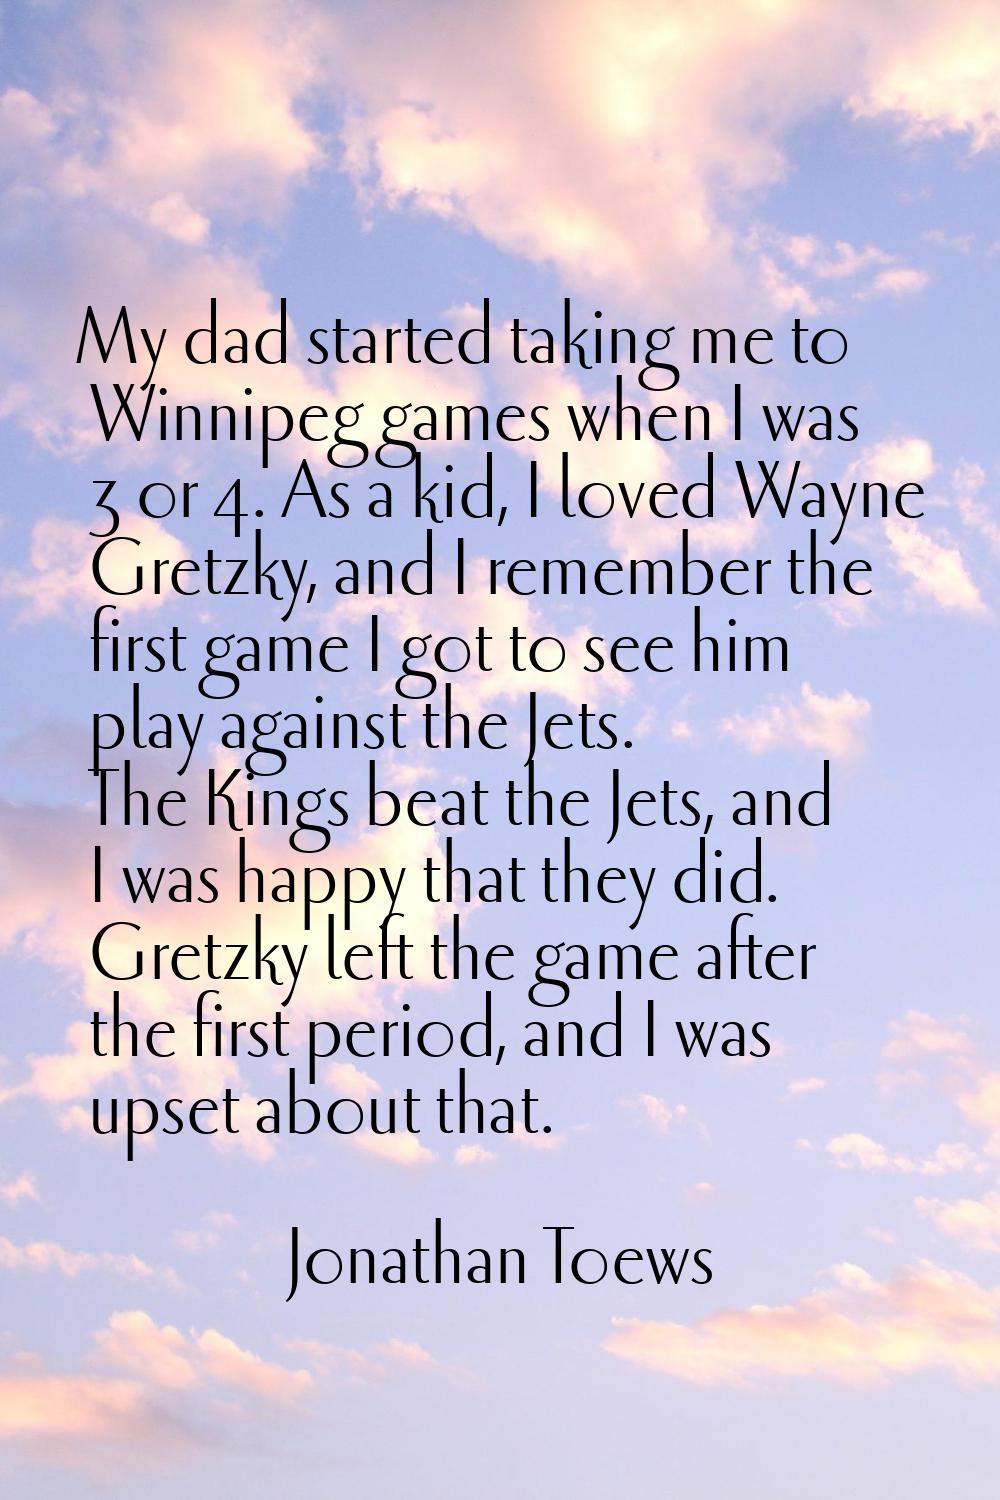 My dad started taking me to Winnipeg games when I was 3 or 4. As a kid, I loved Wayne Gretzky, and 